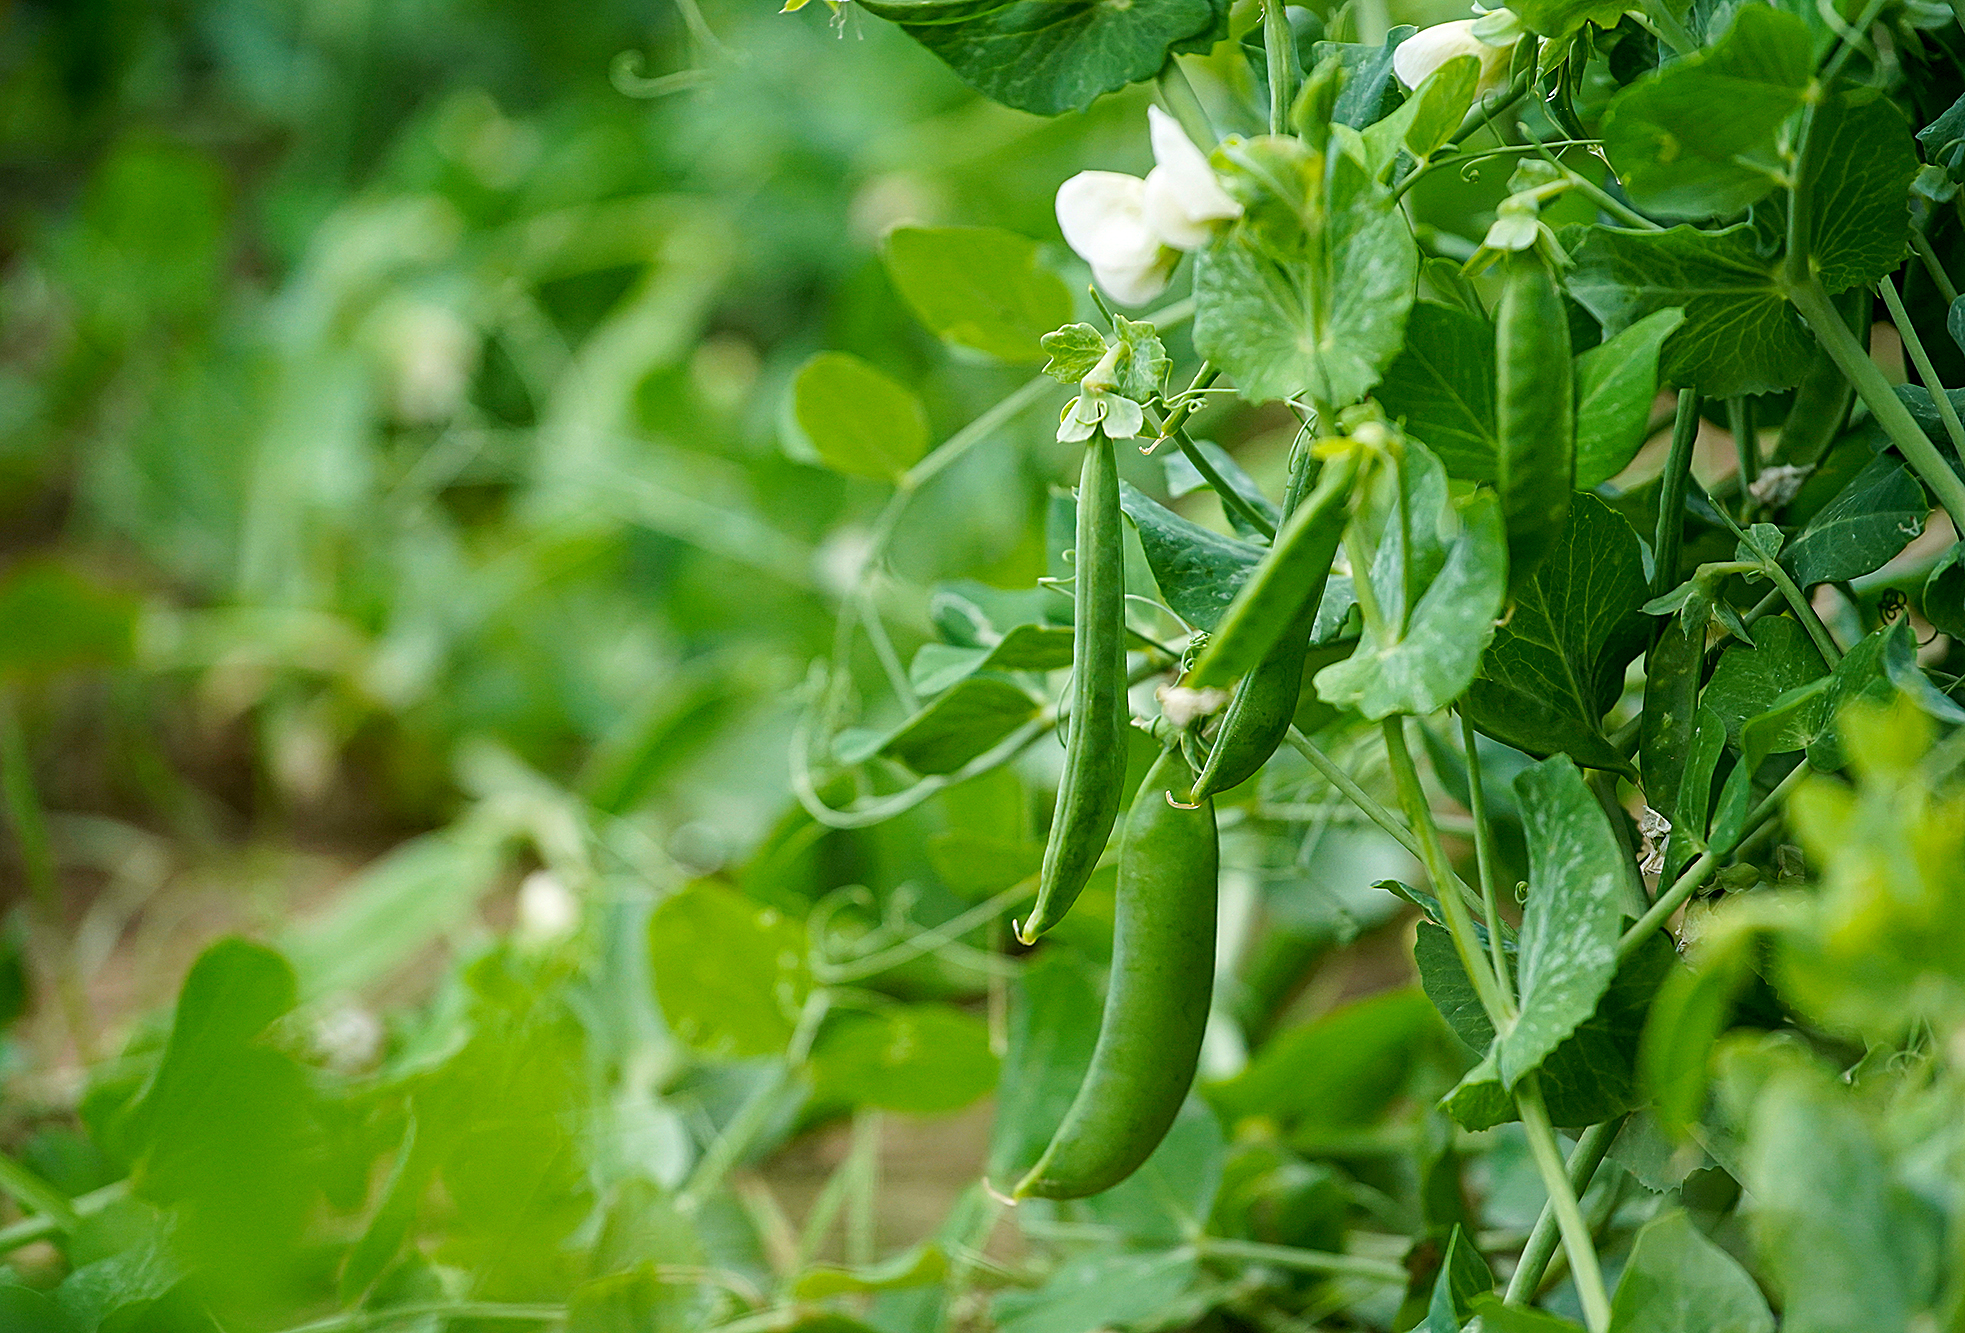 Pea plant and pea pods in the garden. Growing vegetables, gardening at home. Healthy food, blooming peas. Selective focus. Europe Hungary